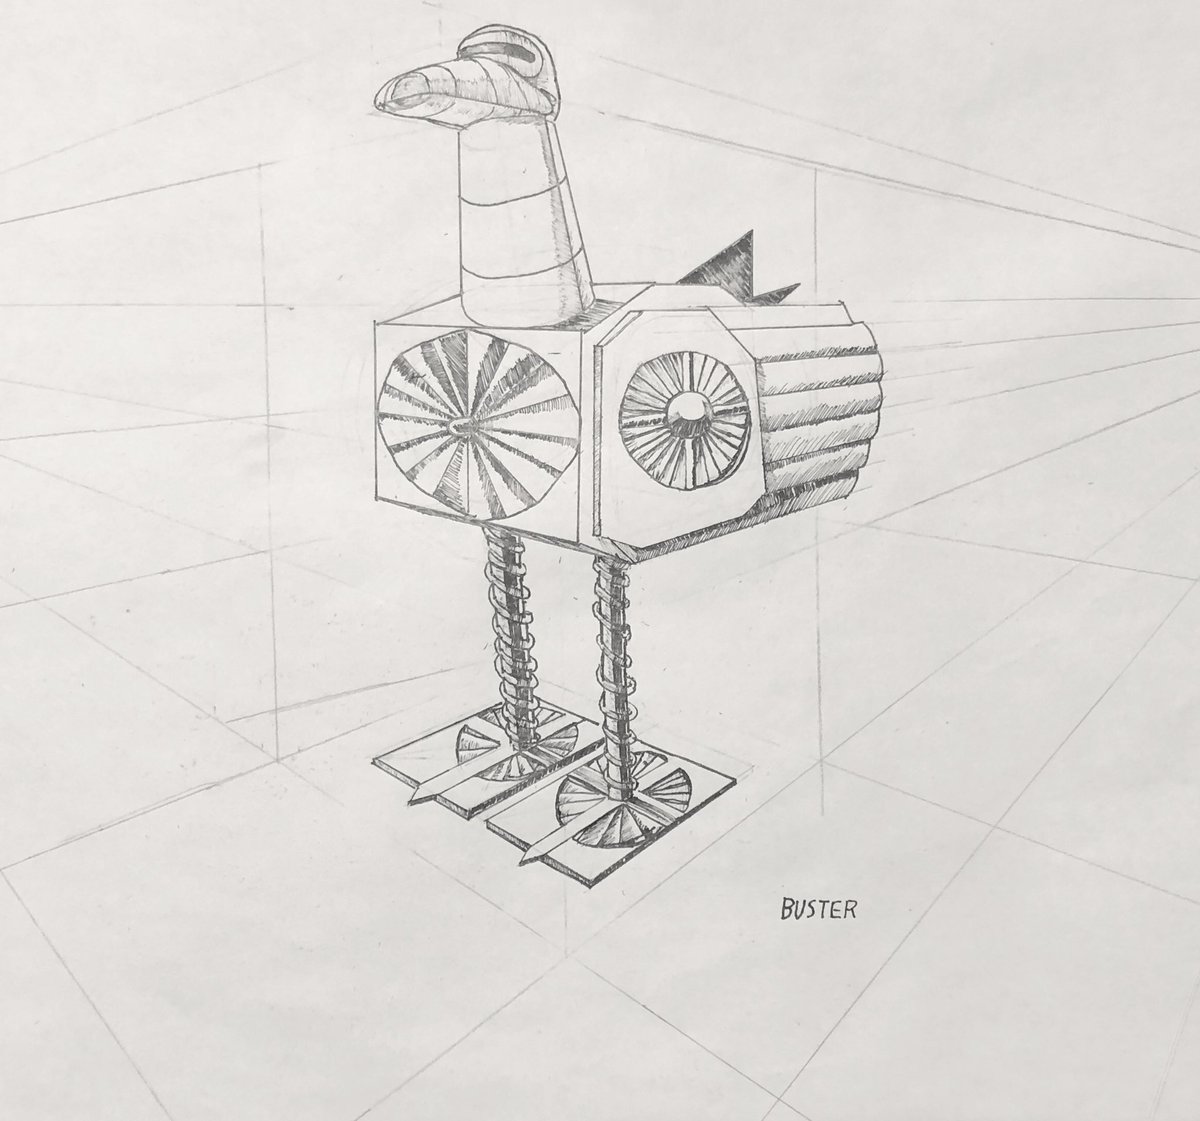 Roboduck. The future of flying. My “Mechabeast” creation in art school. What do you think?